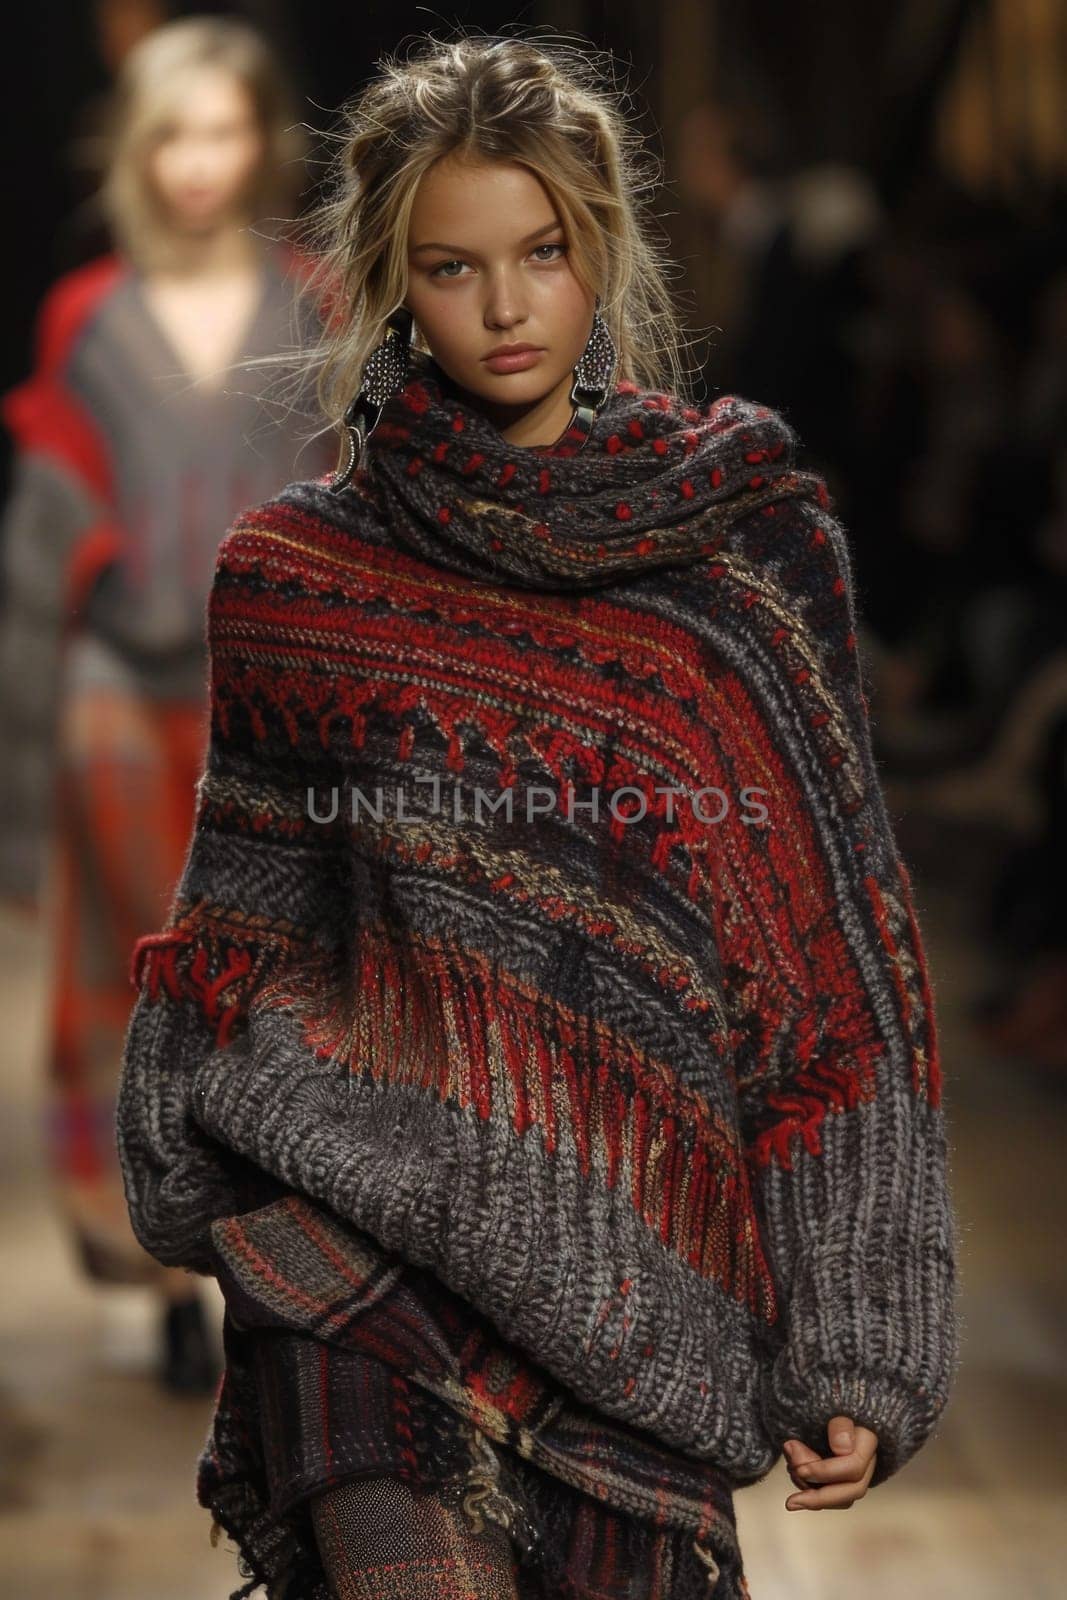 A model walks down the runway in a sweater and skirt